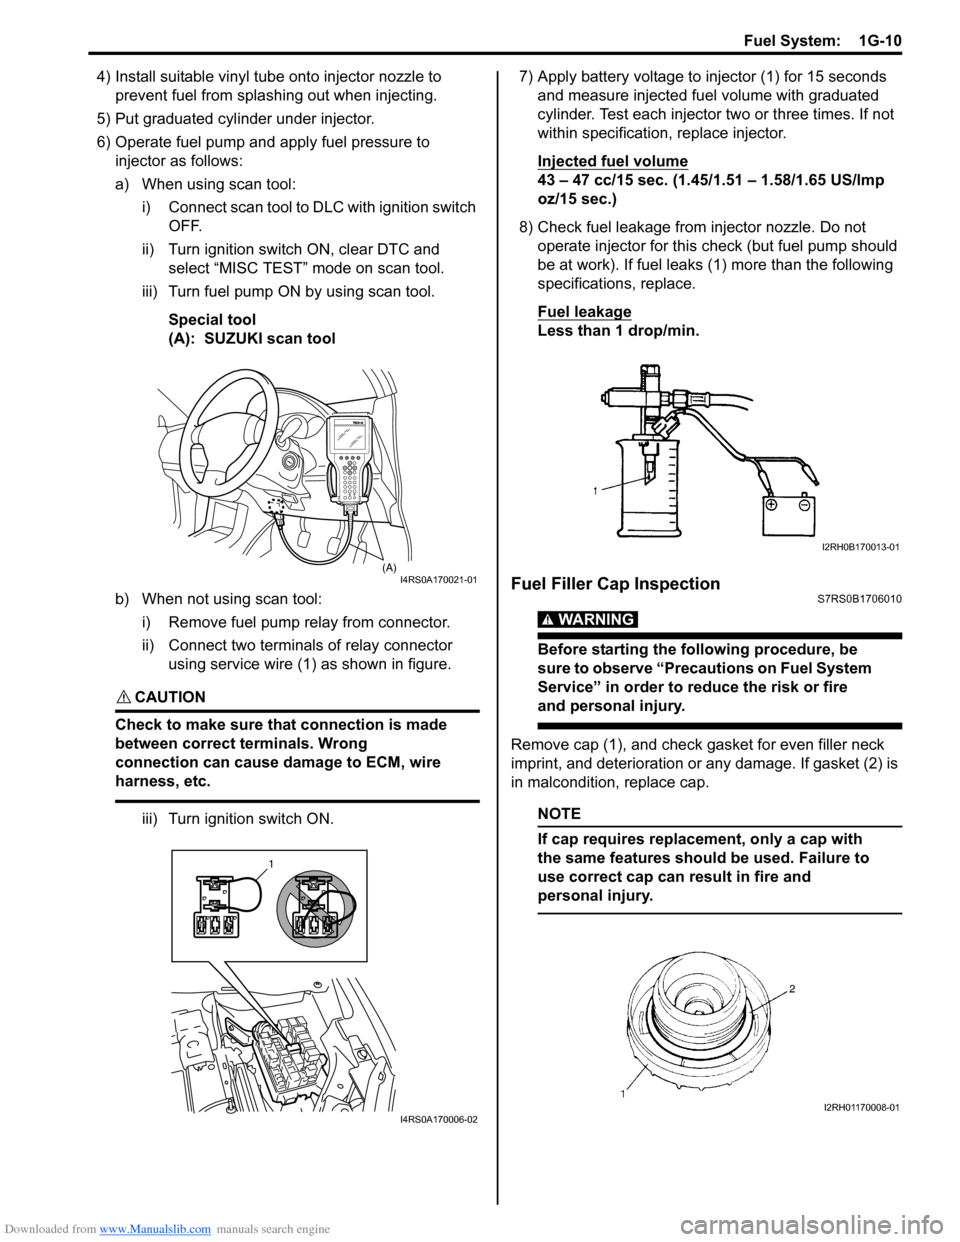 SUZUKI SWIFT 2007 2.G Service Workshop Manual Downloaded from www.Manualslib.com manuals search engine Fuel System:  1G-10
4) Install suitable vinyl tube onto injector nozzle to 
prevent fuel from splashing out when injecting.
5) Put graduated cy